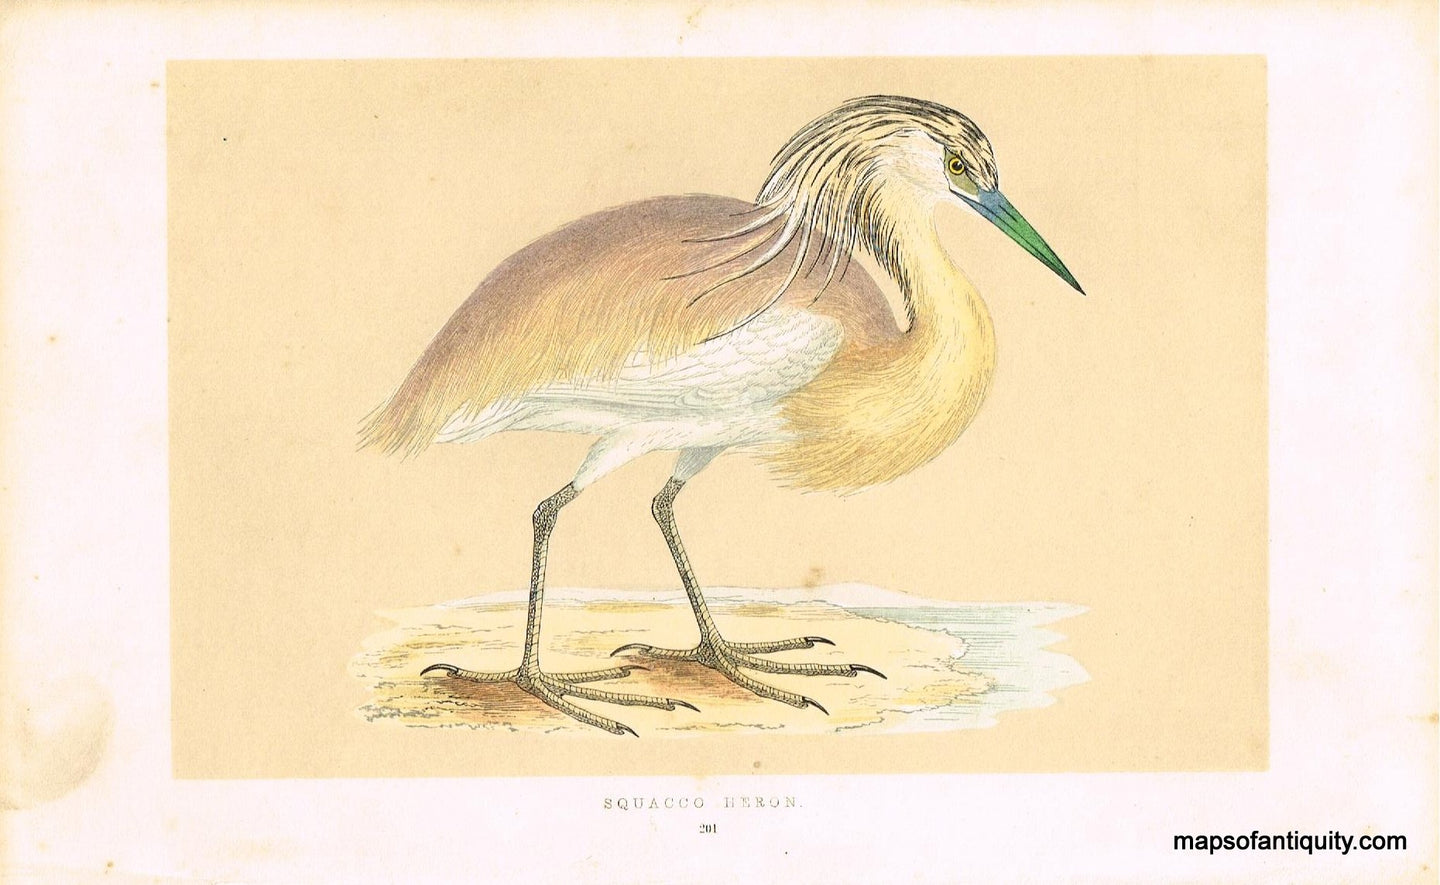 Antique-Hand-Colored-Engraved-Illustration-Squacco-Heron-Morris-bird-Natural-History-Birds-1851-Morris-Maps-Of-Antiquity